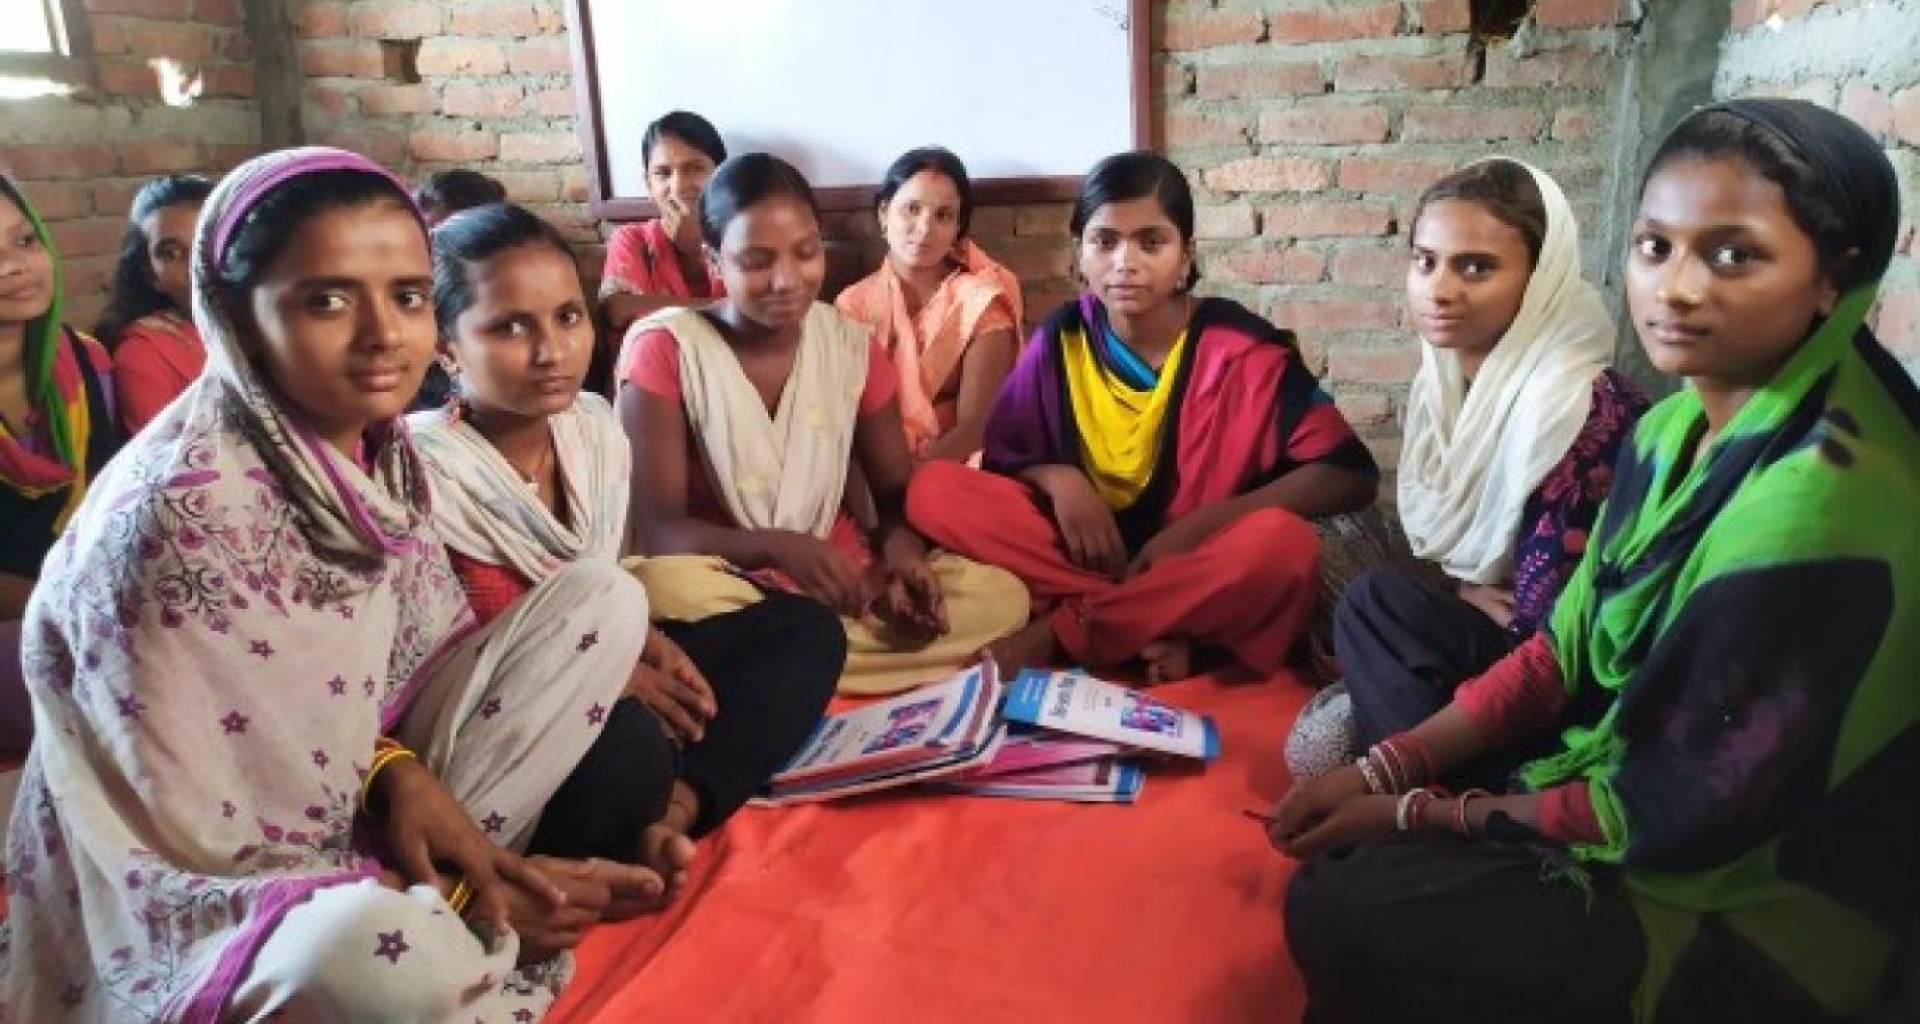 A group of eleven women wearing kurthas are sitting on a red mattress inside a newly built room. There are notebooks in front of them and a whiteboard behind at the wall.